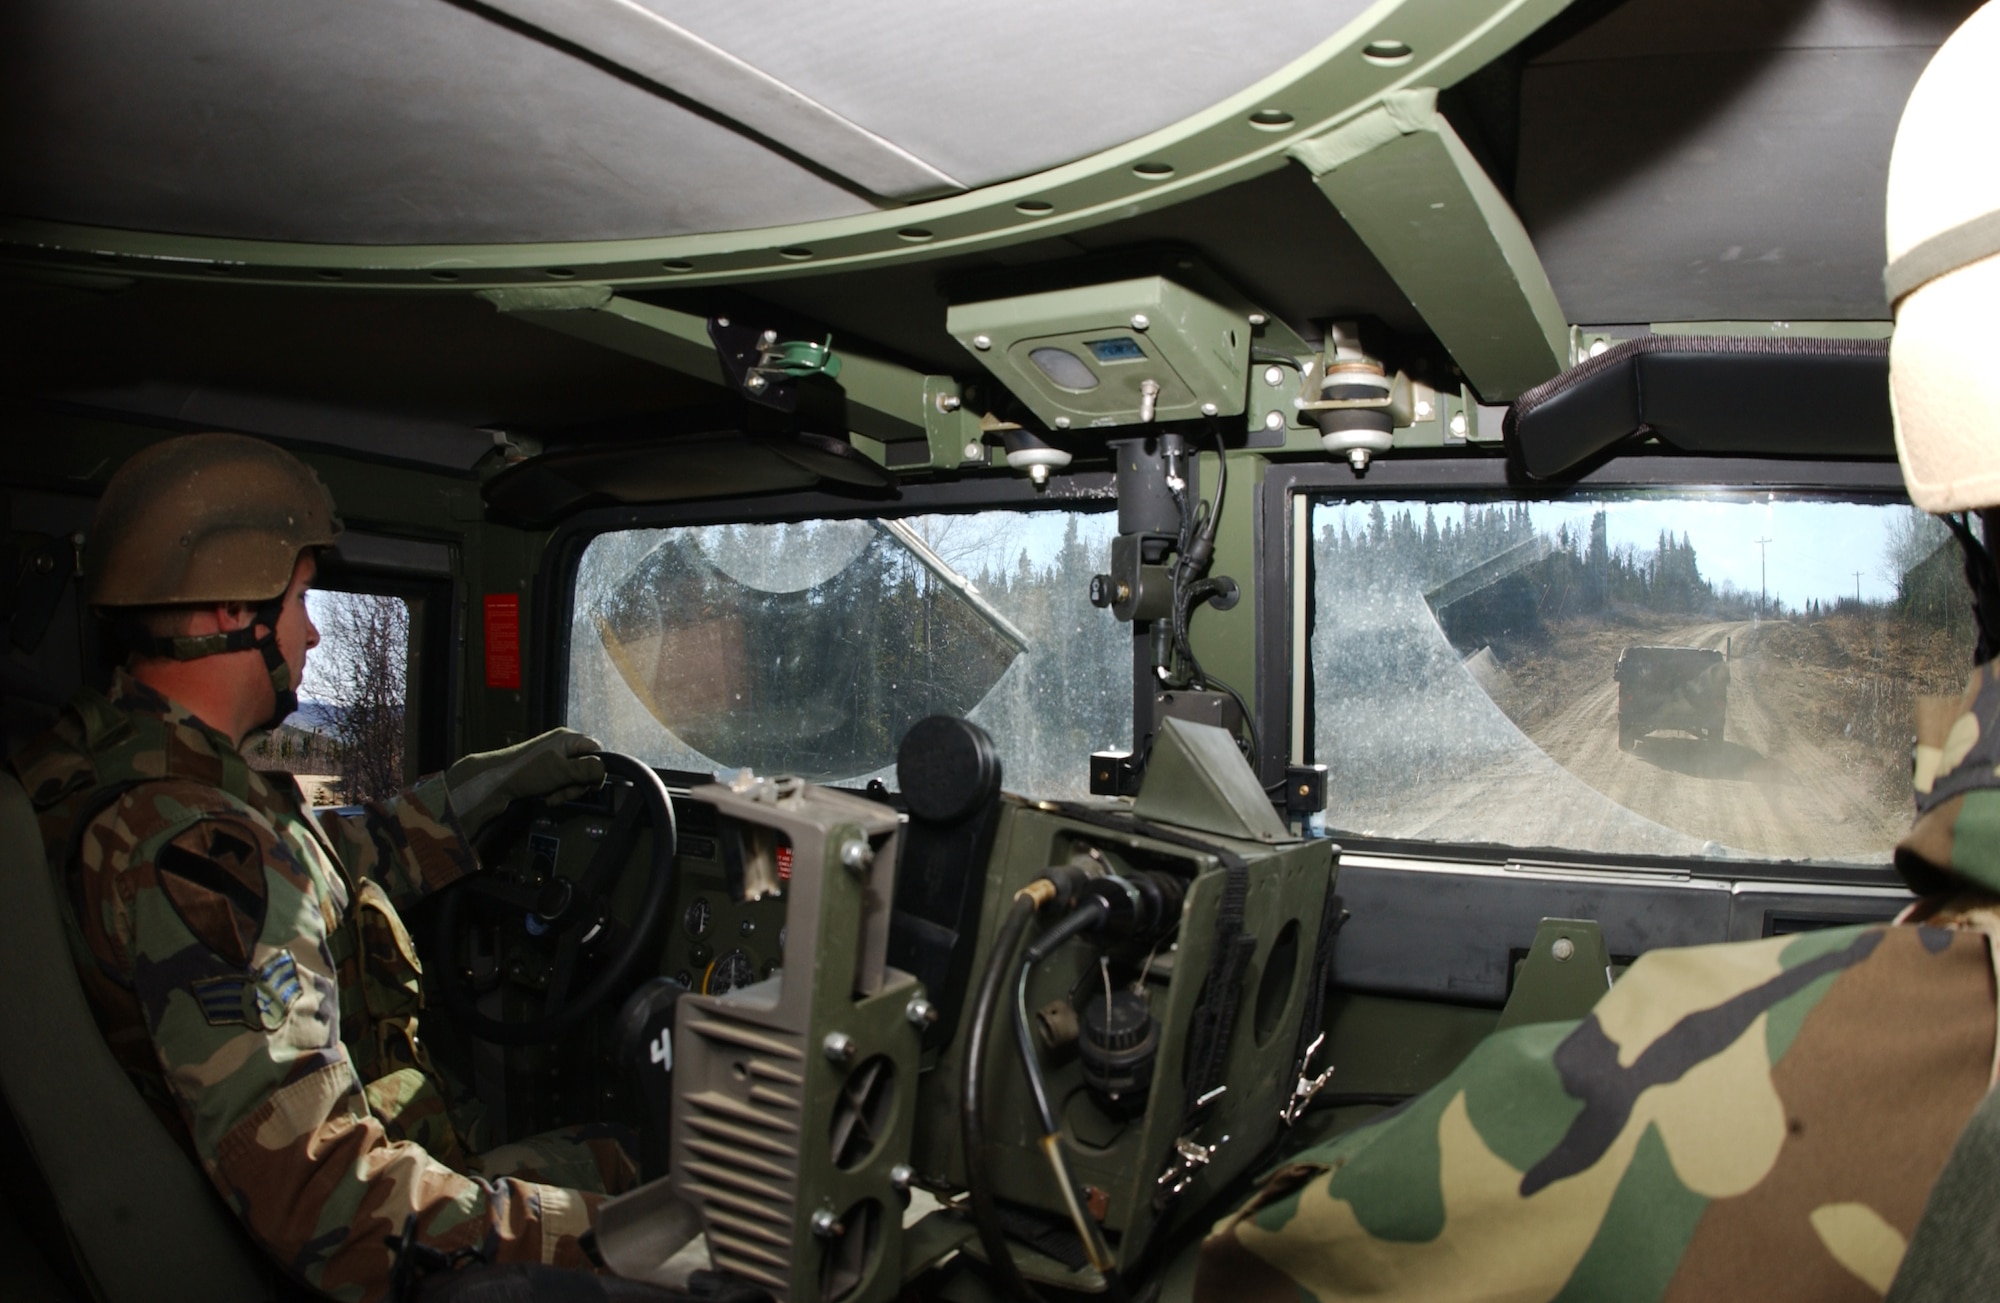 EIELSON AIR FORCE BASE, Alaska -- Senior Airman Robert Olson, 3rd Air Support Operations Squadron tactical air control party, drives a Humvee for a vehicle navigation exercise during Operation URSA Minor May 16 on the Pacific Alaska Range Complex. The 3rd ASOS, equips, and maintains mission-ready air liaison, terminal attack control, and weather observation/forecasting elements to support the U.S. Army Alaska 1st Stryker Brigade Combat Team. (U.S. Air Force Photo by Airman 1st Class Jonathan Snyder) 